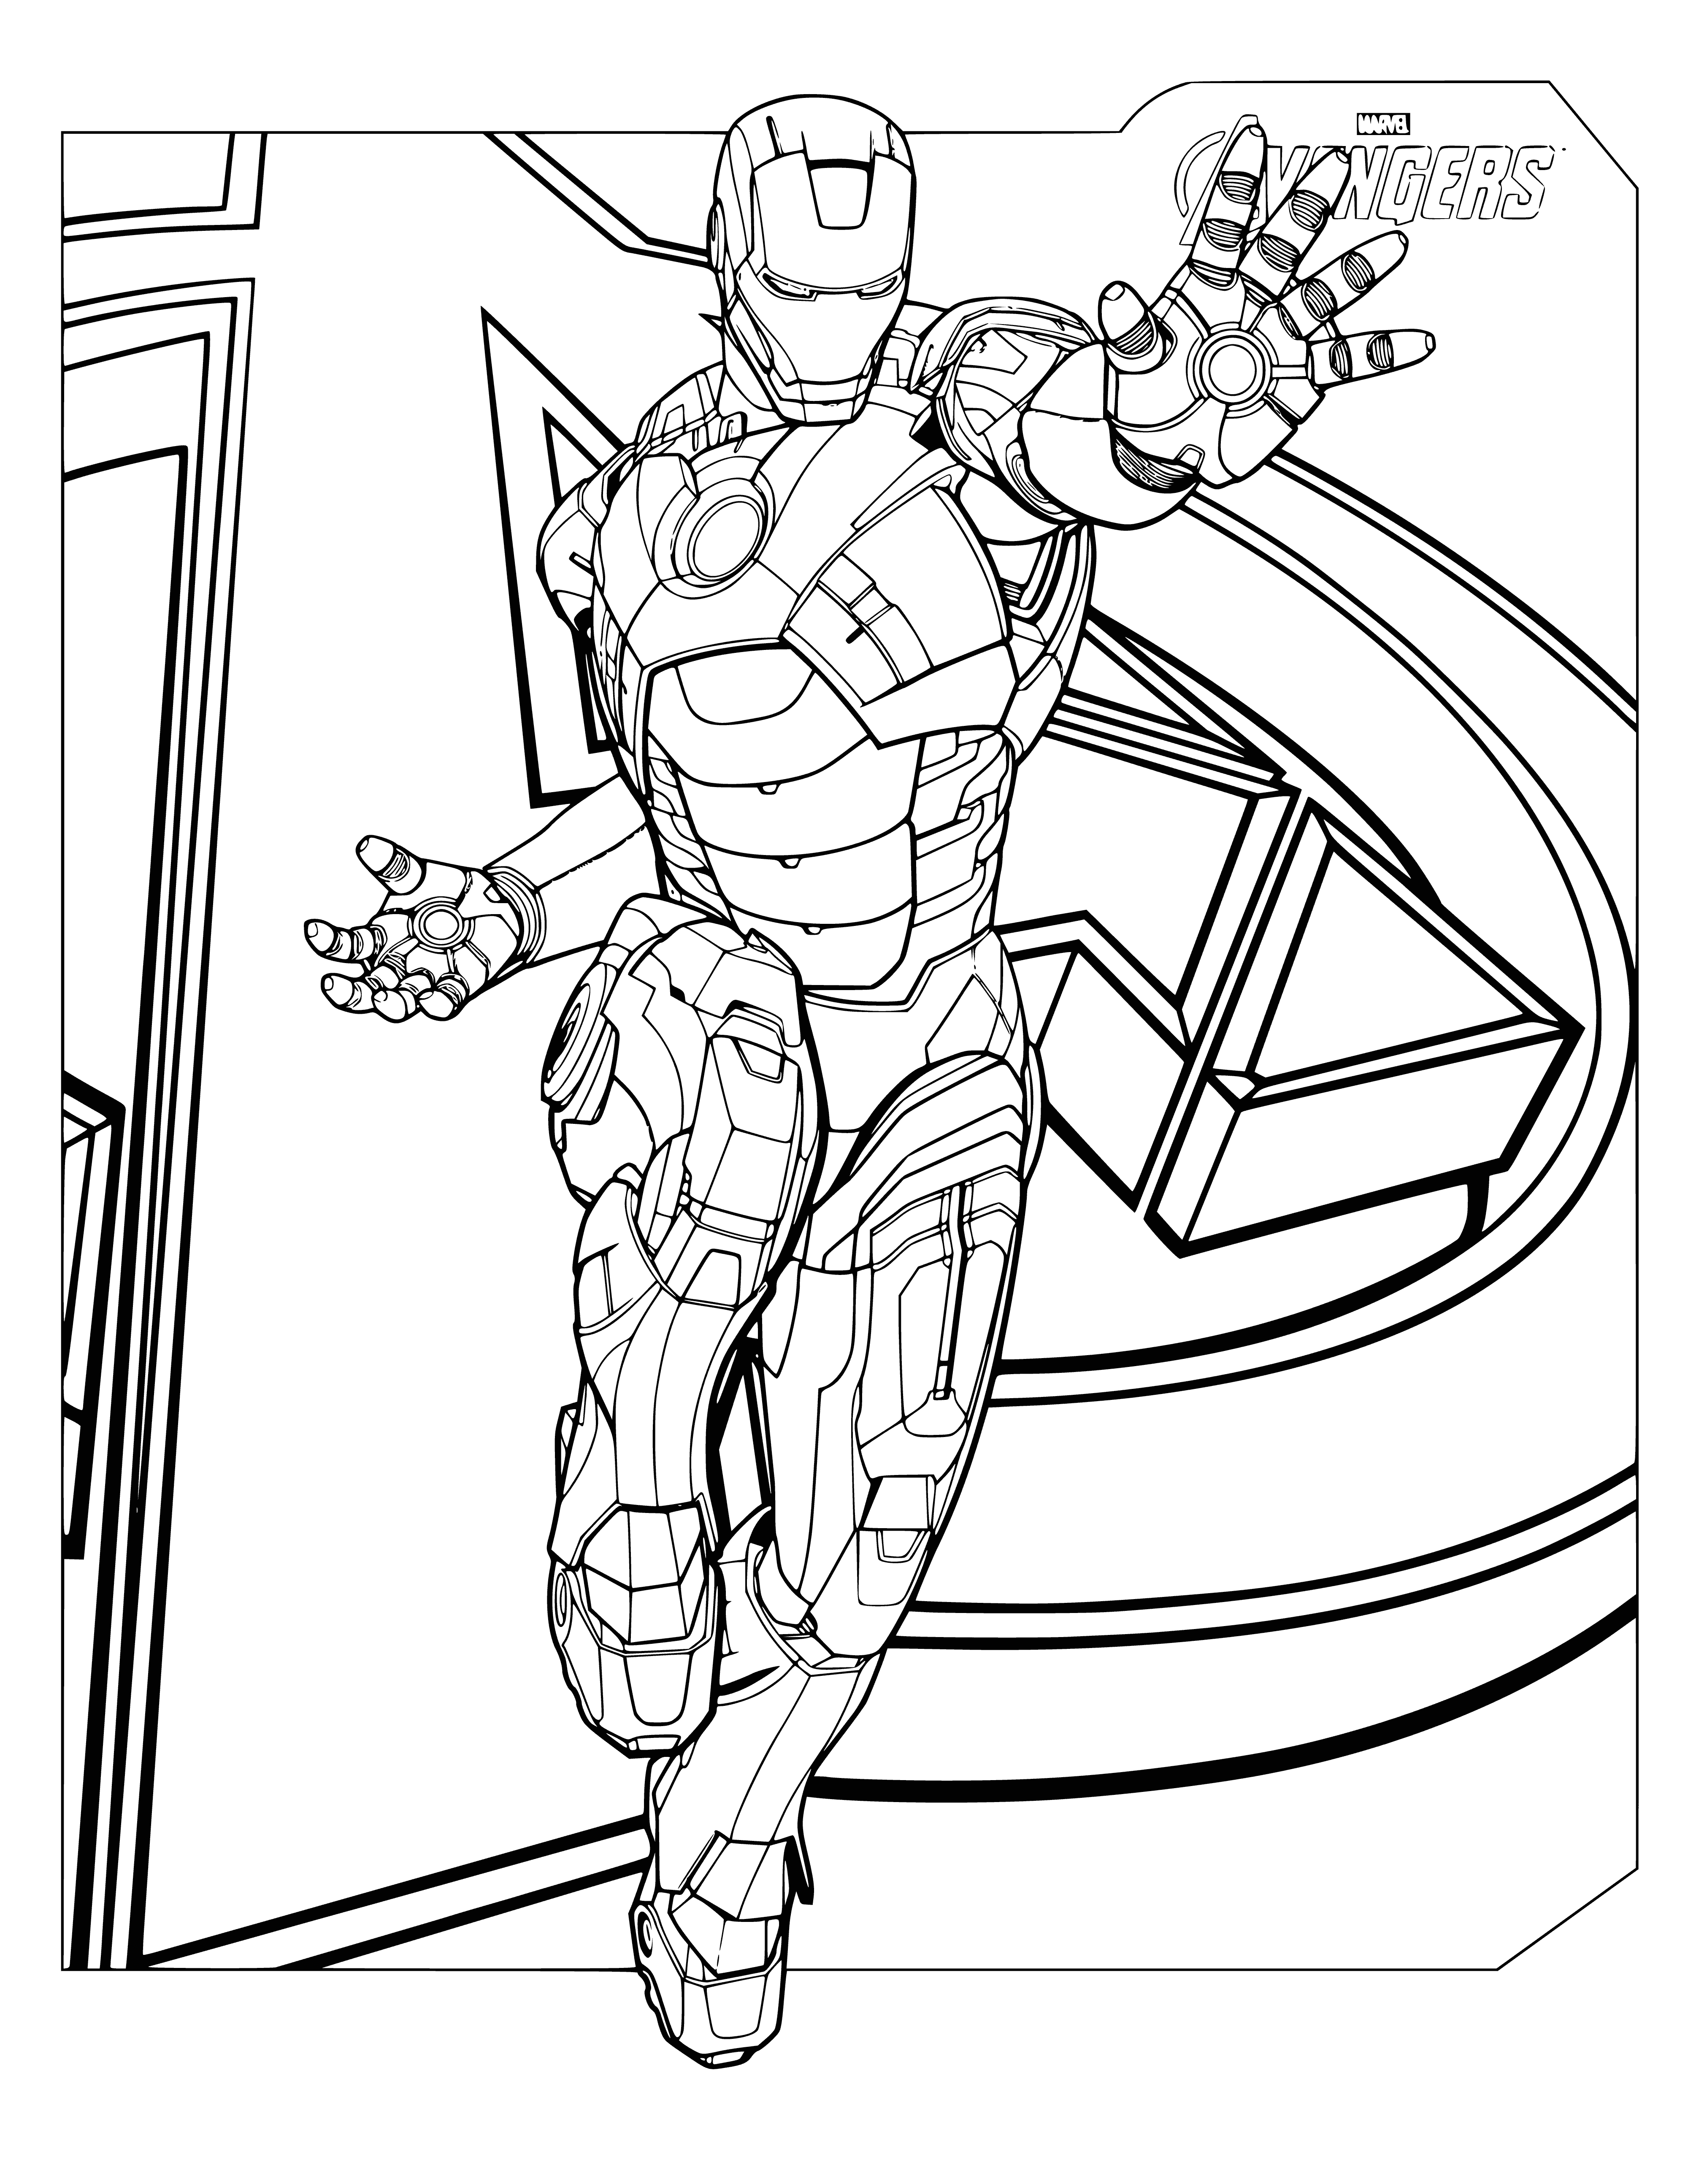 coloring page: Tony Stark: Billionaire industrialist/inventor. CEO of Stark Industries & founding Avenger. Genius scientist/engineer; skilled business leader; advanced tech.